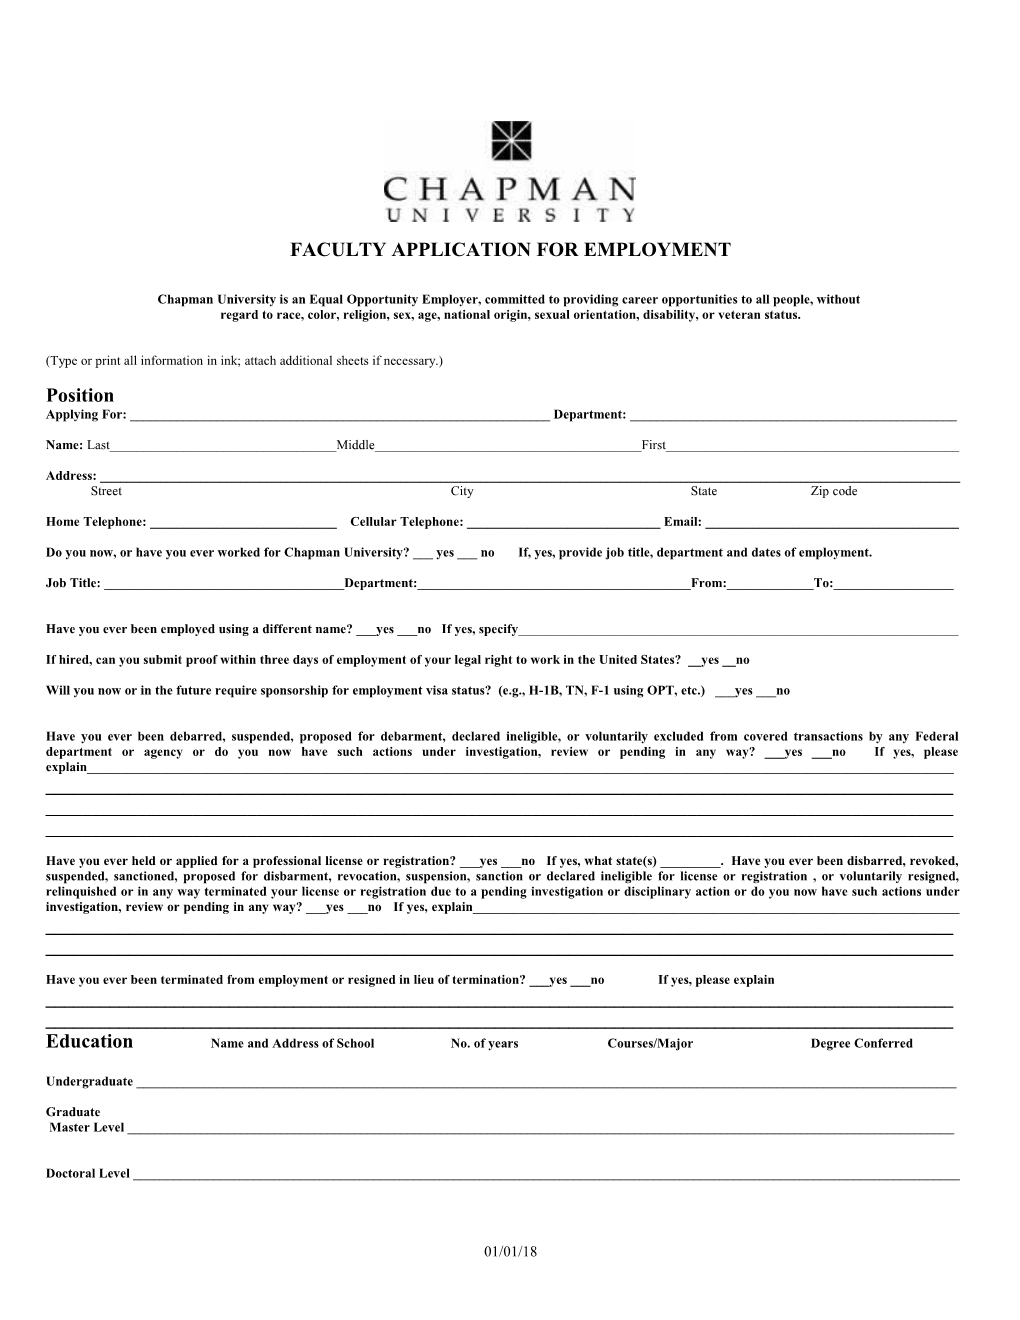 Faculty Application for Employment